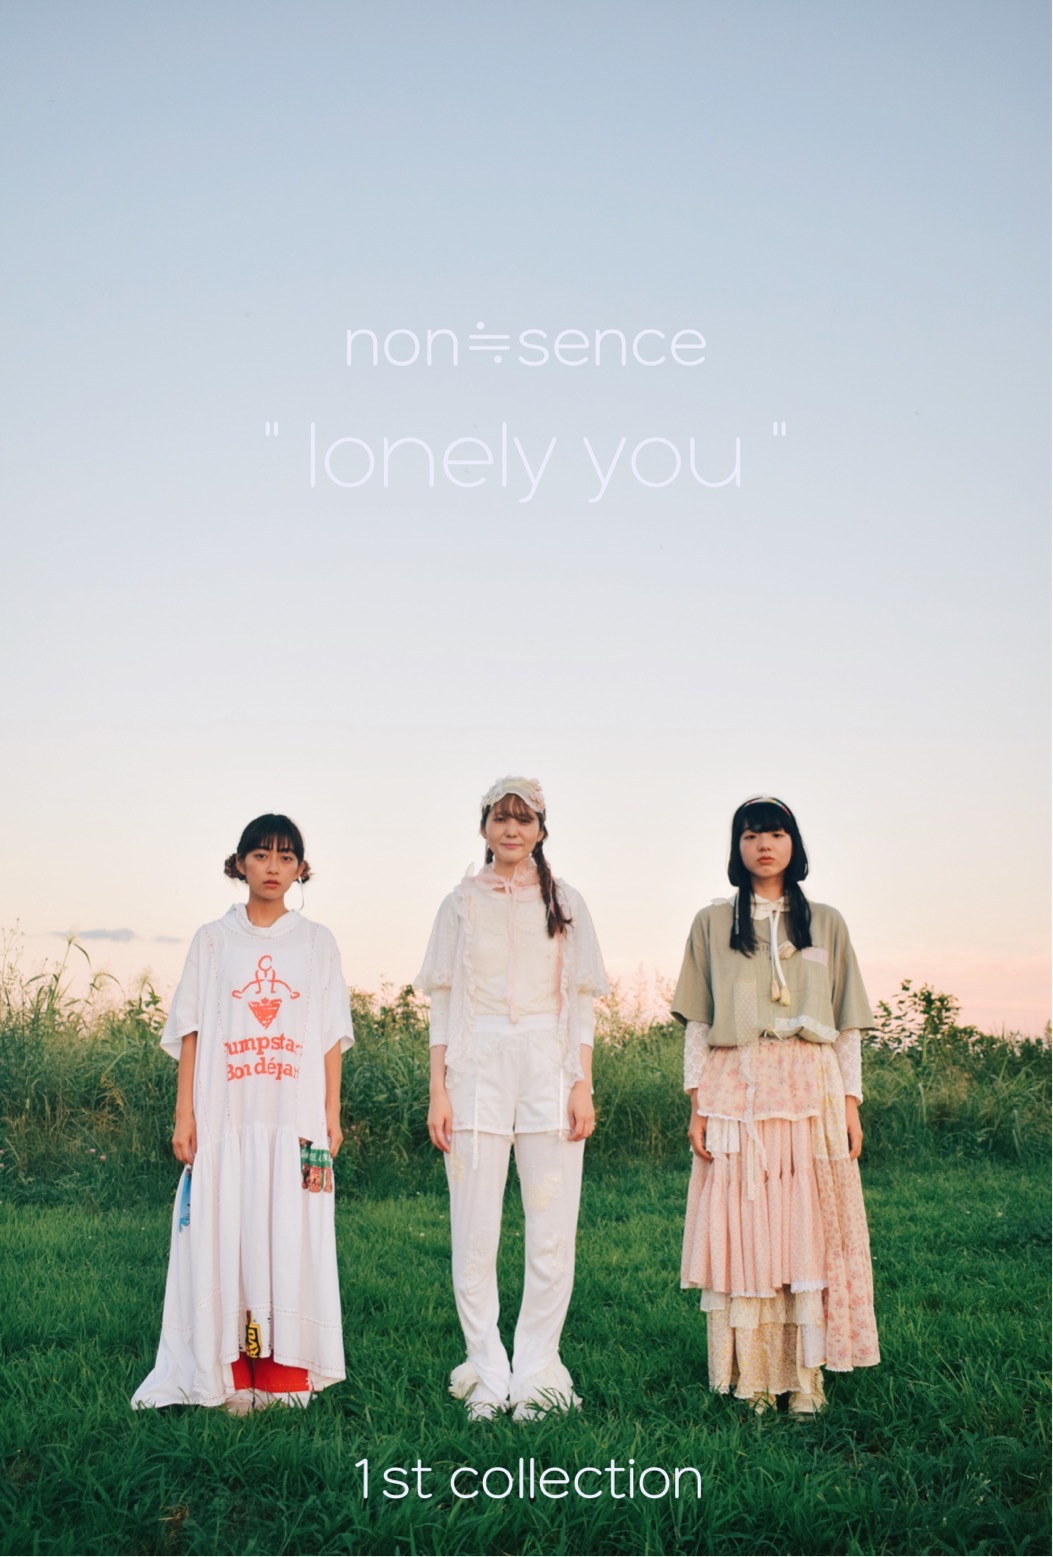 " lonely you "   〜1st collection short film